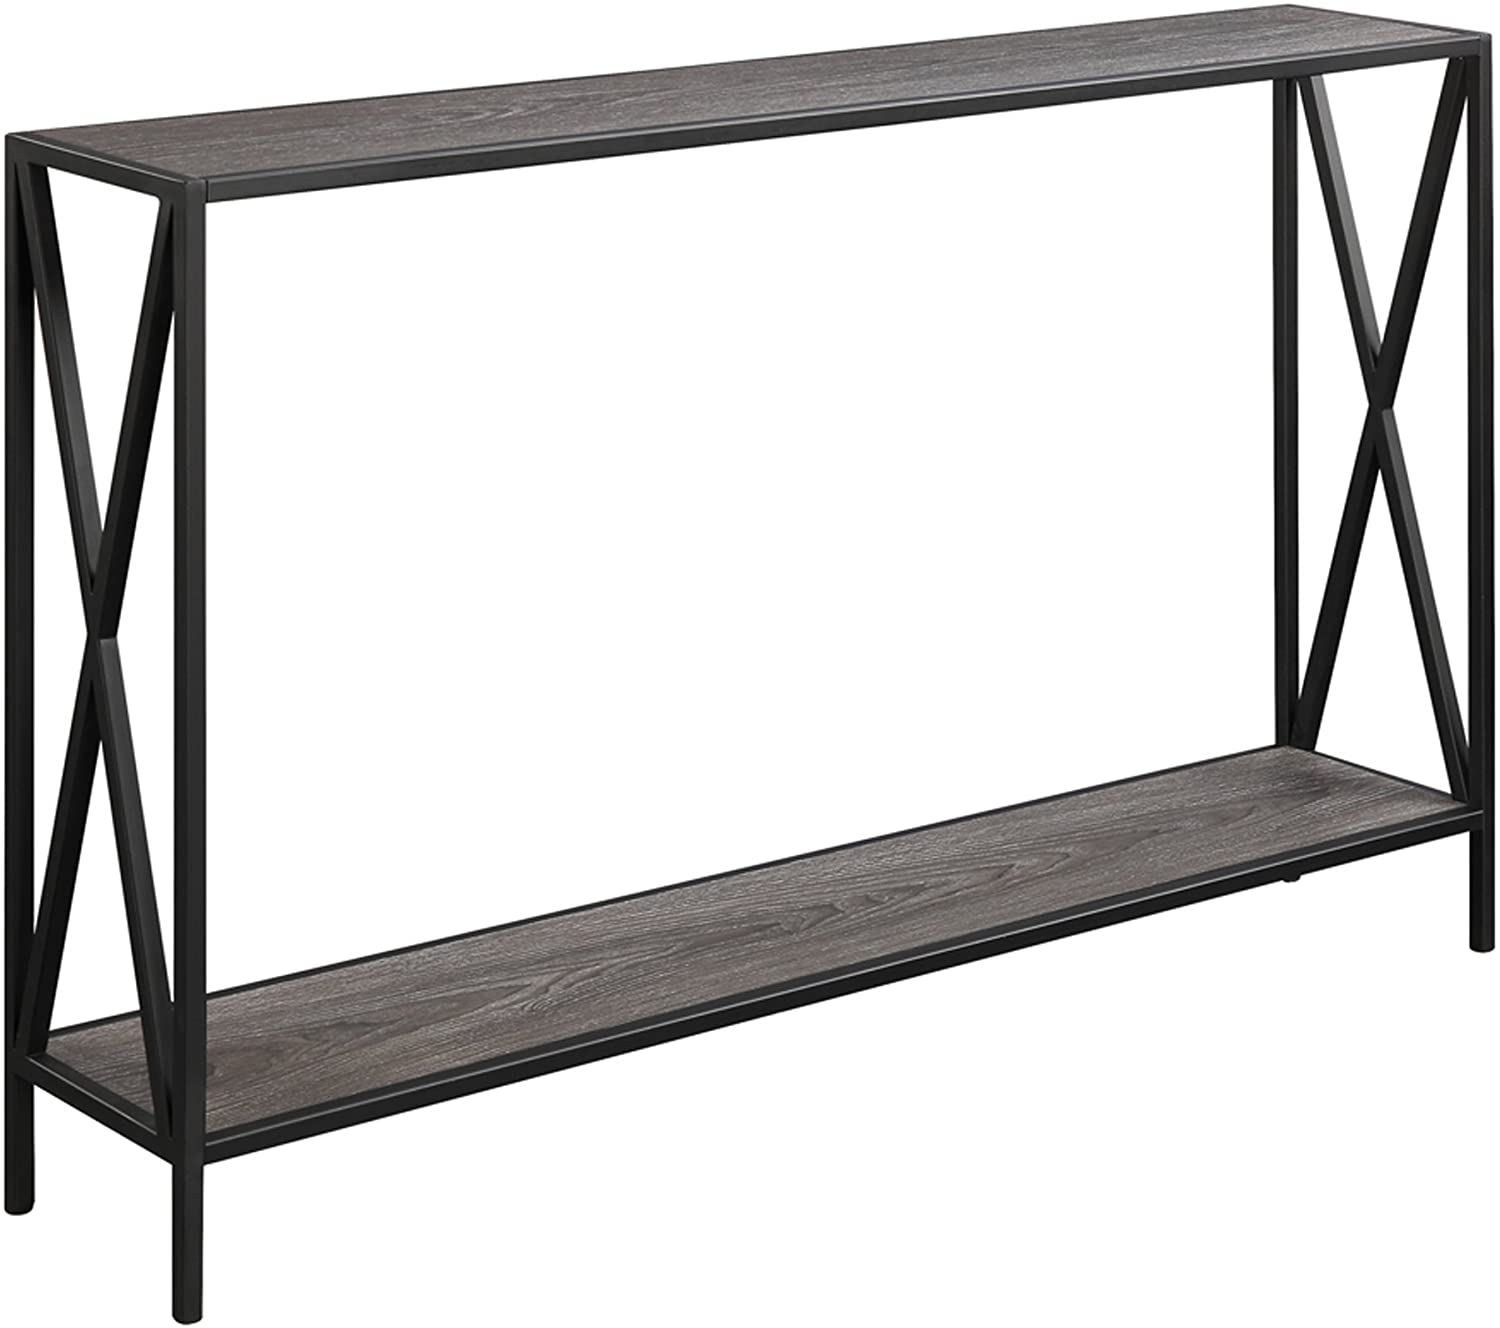 Convenience Concepts Tucson Crisscross Console Table For Entryway